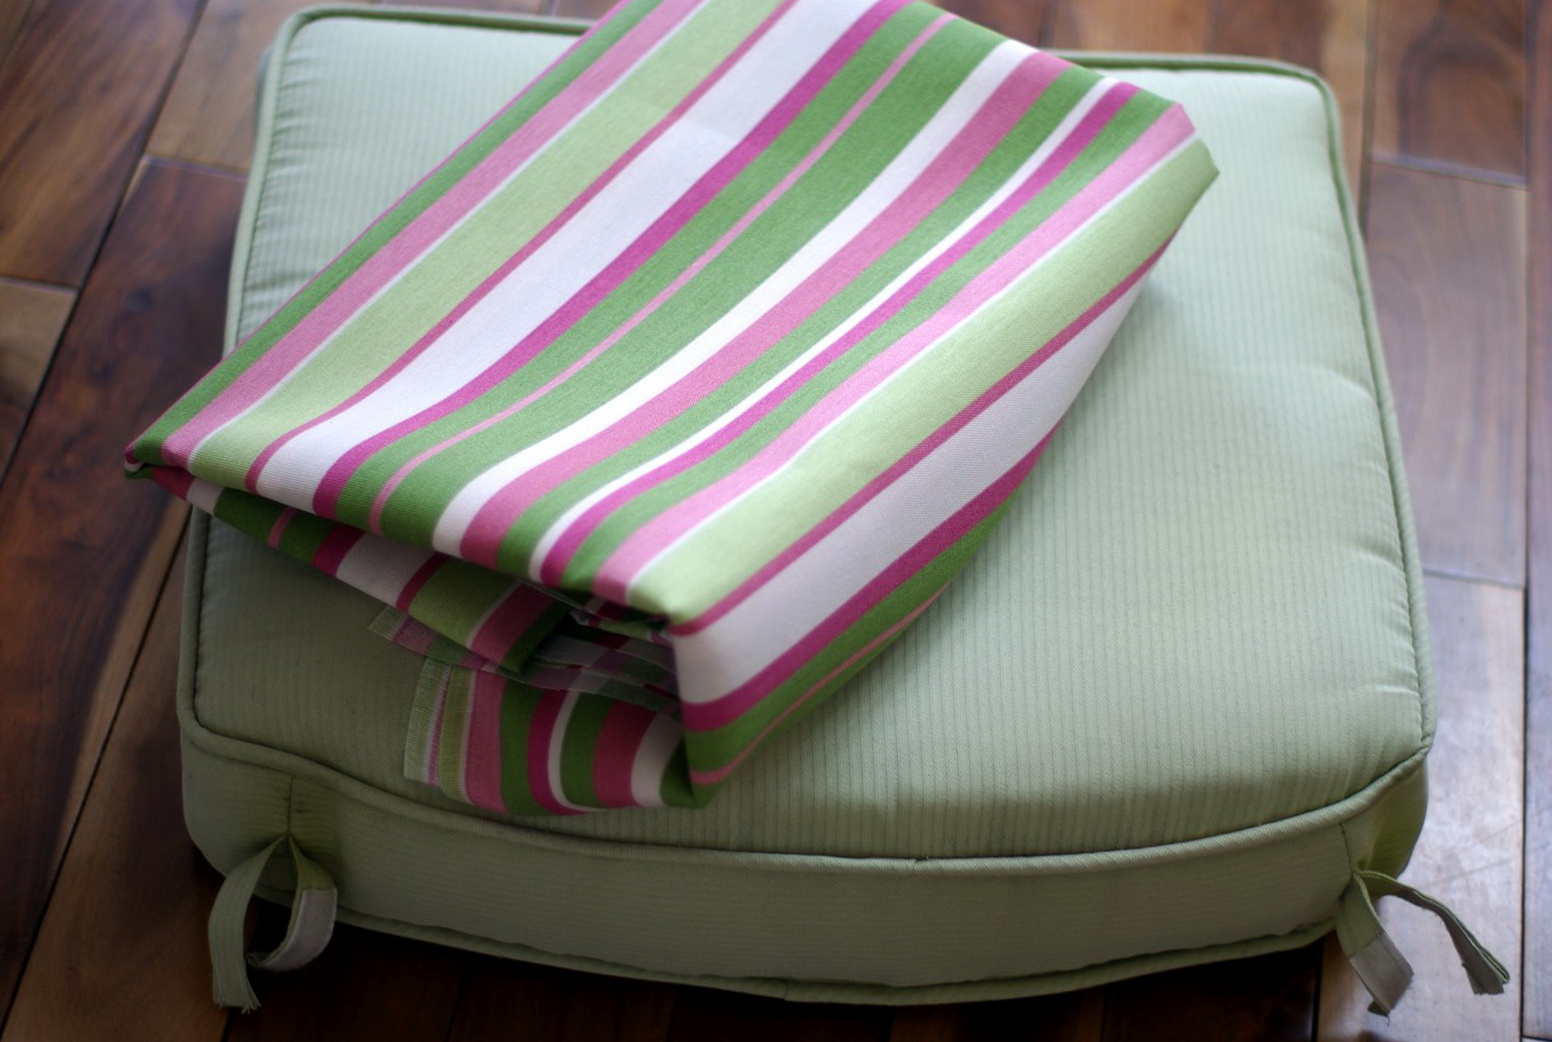 Luxe Self Inflating Seat Cushion | Home Design Ideas